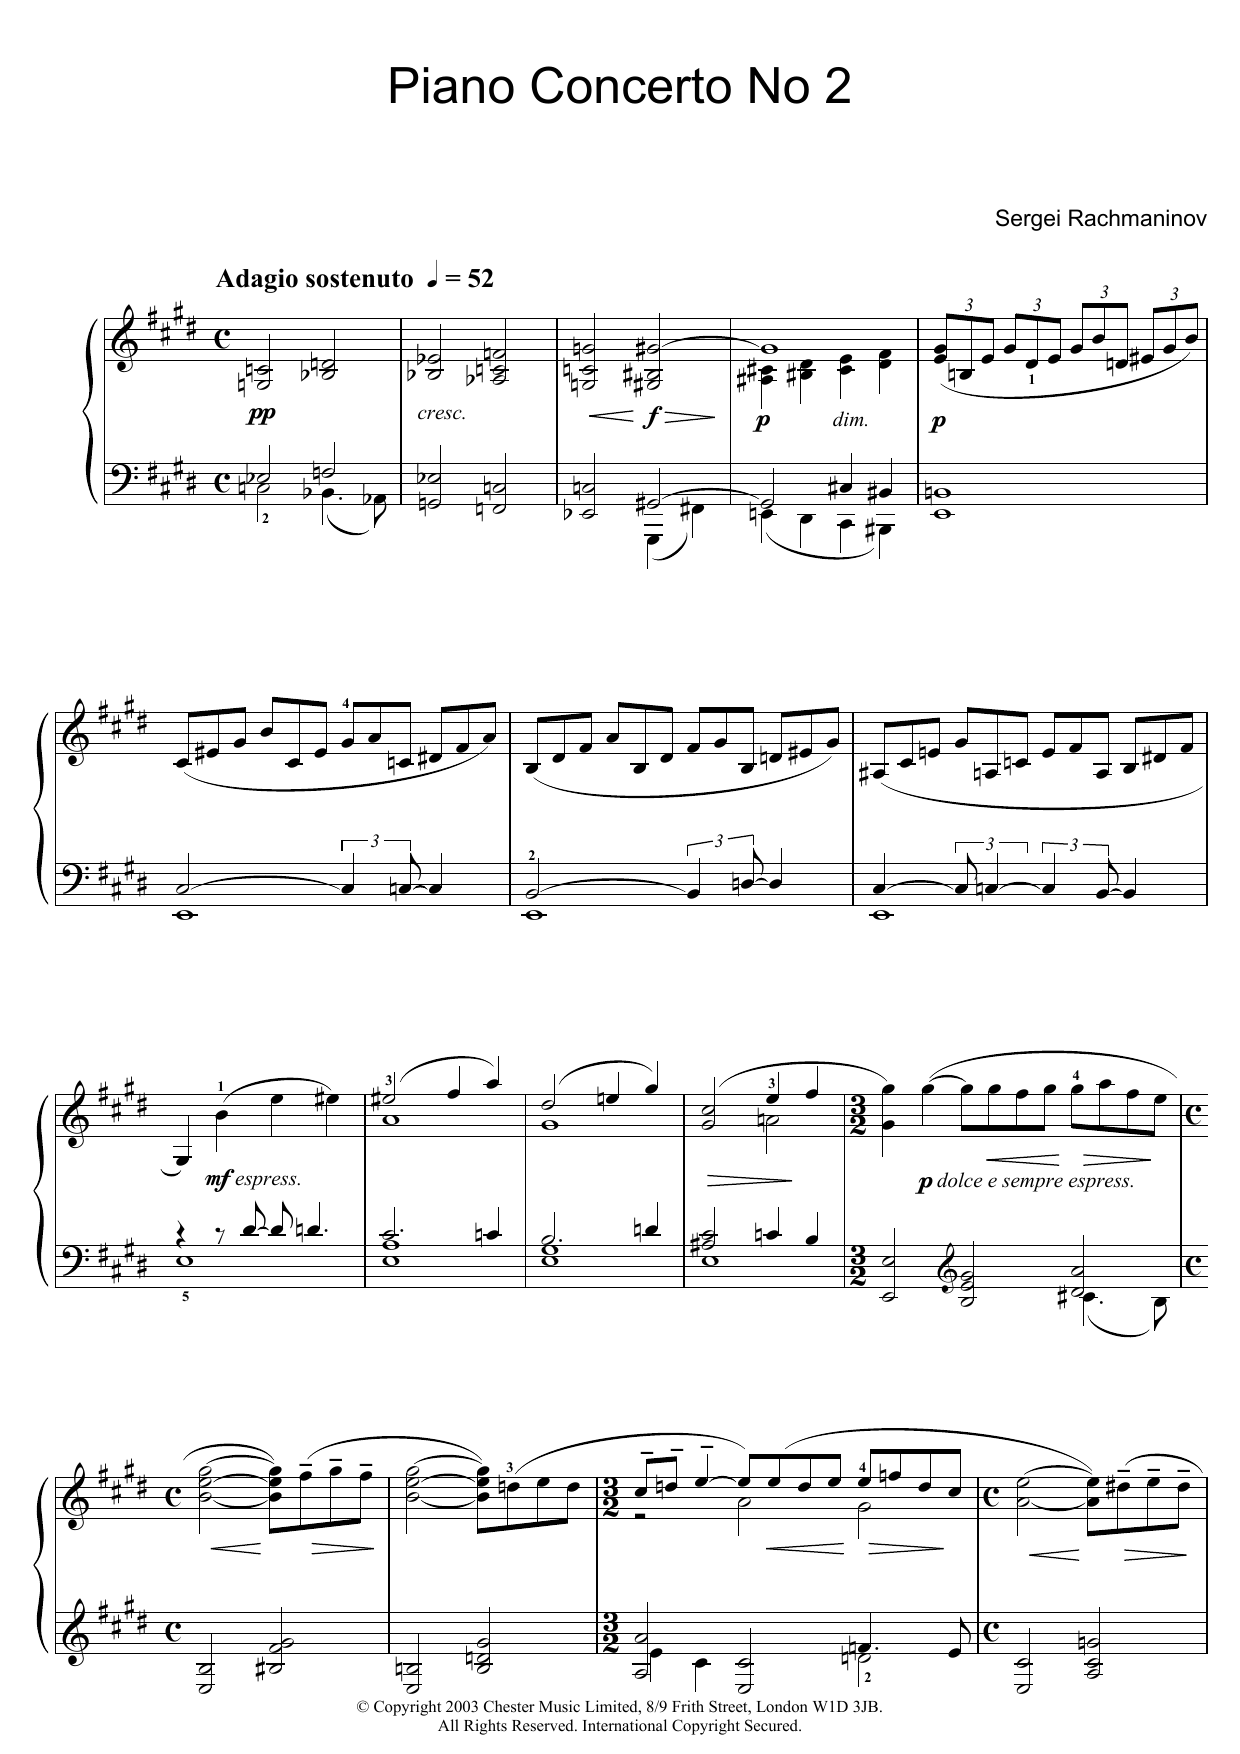 Sergei Rachmaninoff Piano Concerto No. 2 sheet music notes and chords. Download Printable PDF.